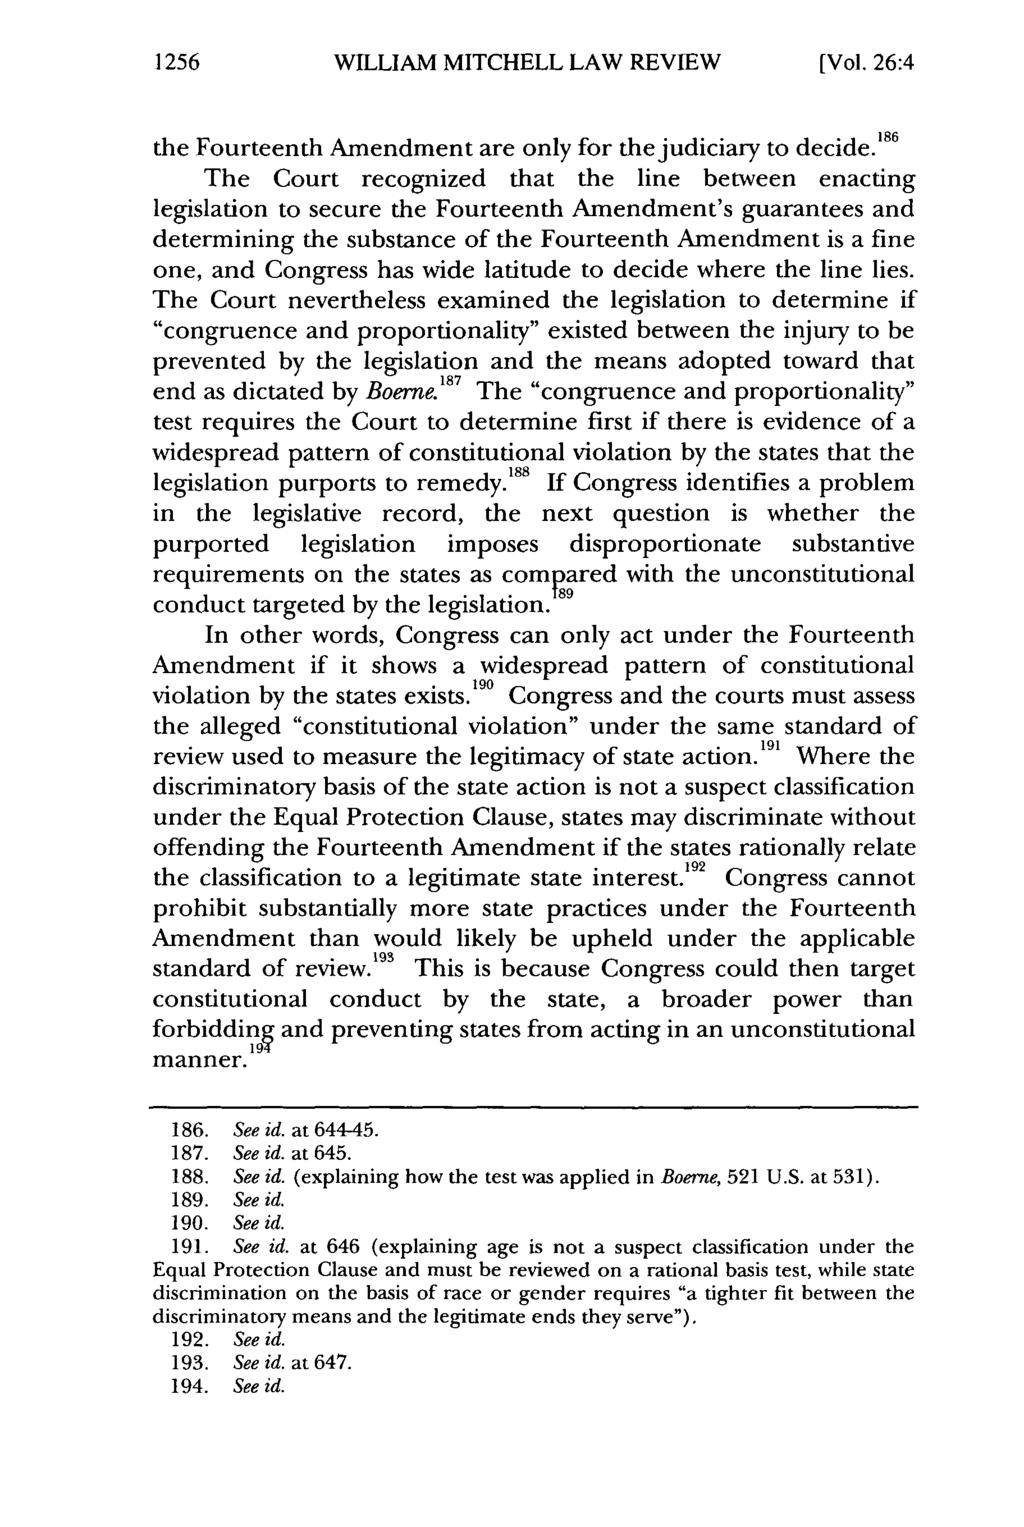 1256 William WILLIAM Mitchell Law MITCHELL Review, Vol. 26, LAW Iss. 4 [2000], REVIEW Art. 12 [Vol. 26:4 the Fourteenth Amendment are only for the judiciary to decide.